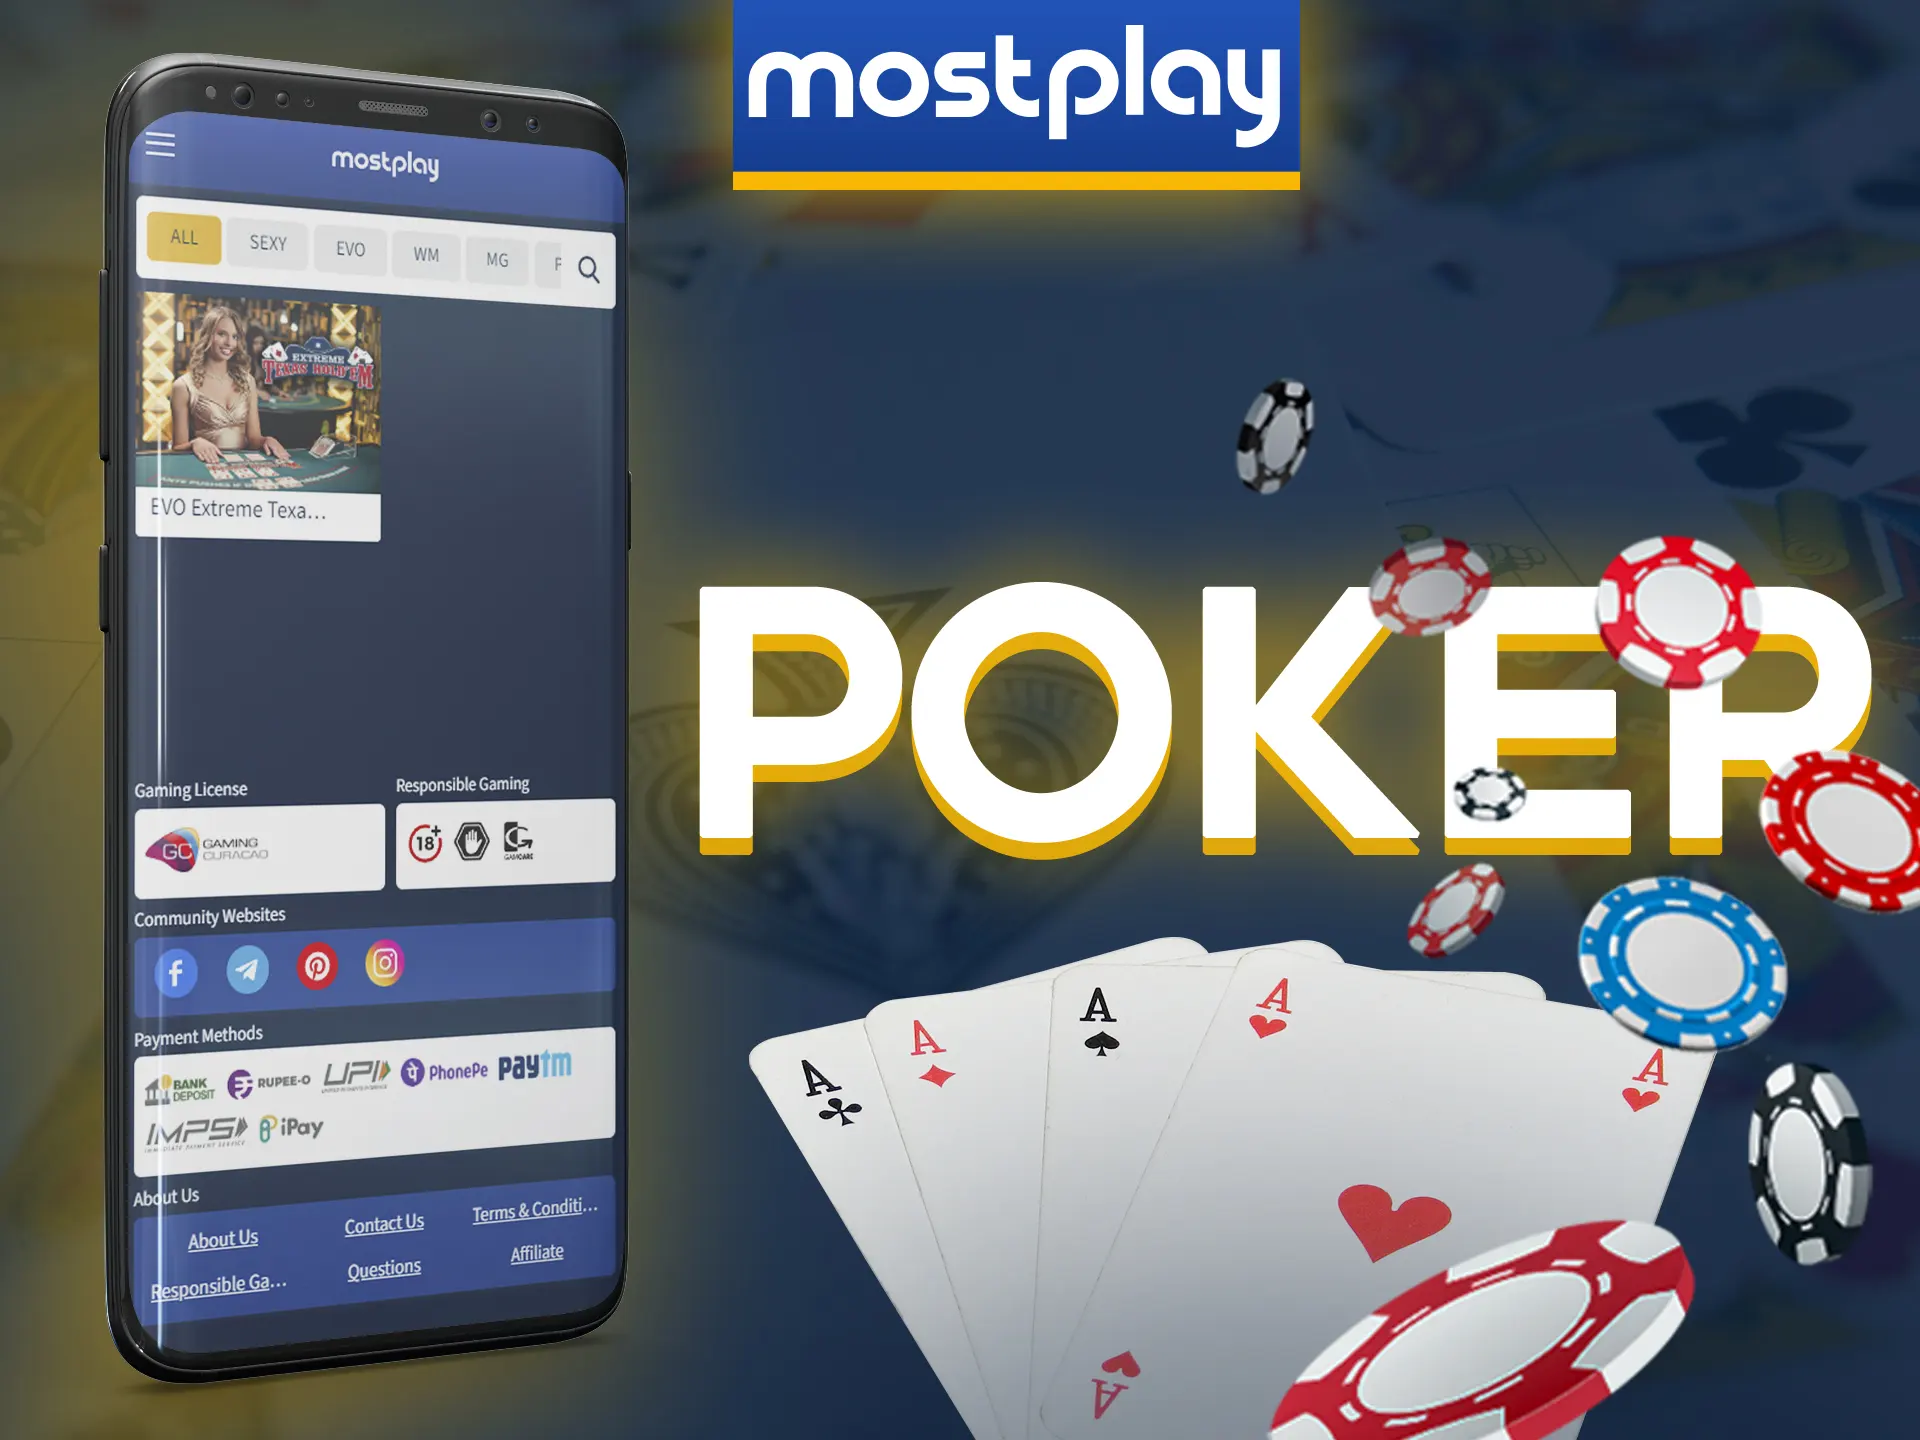 Play poker at the Mostplay casino.